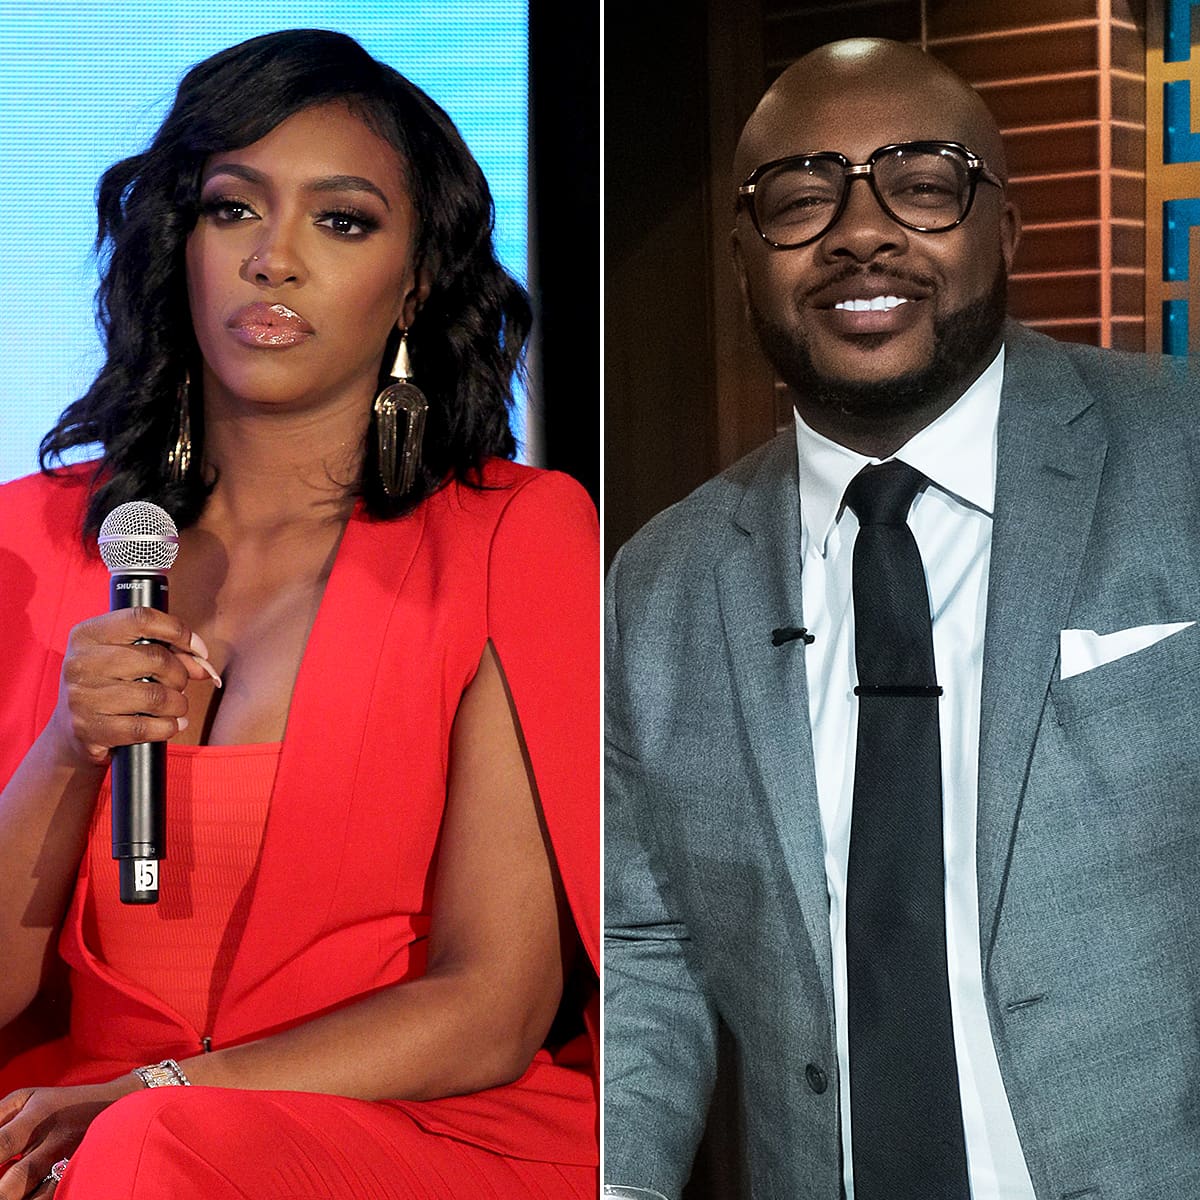 Porsha Williams Recalls The Times When She Was Pregnant With PJ - See The Throwback Photo With Dennis McKinley